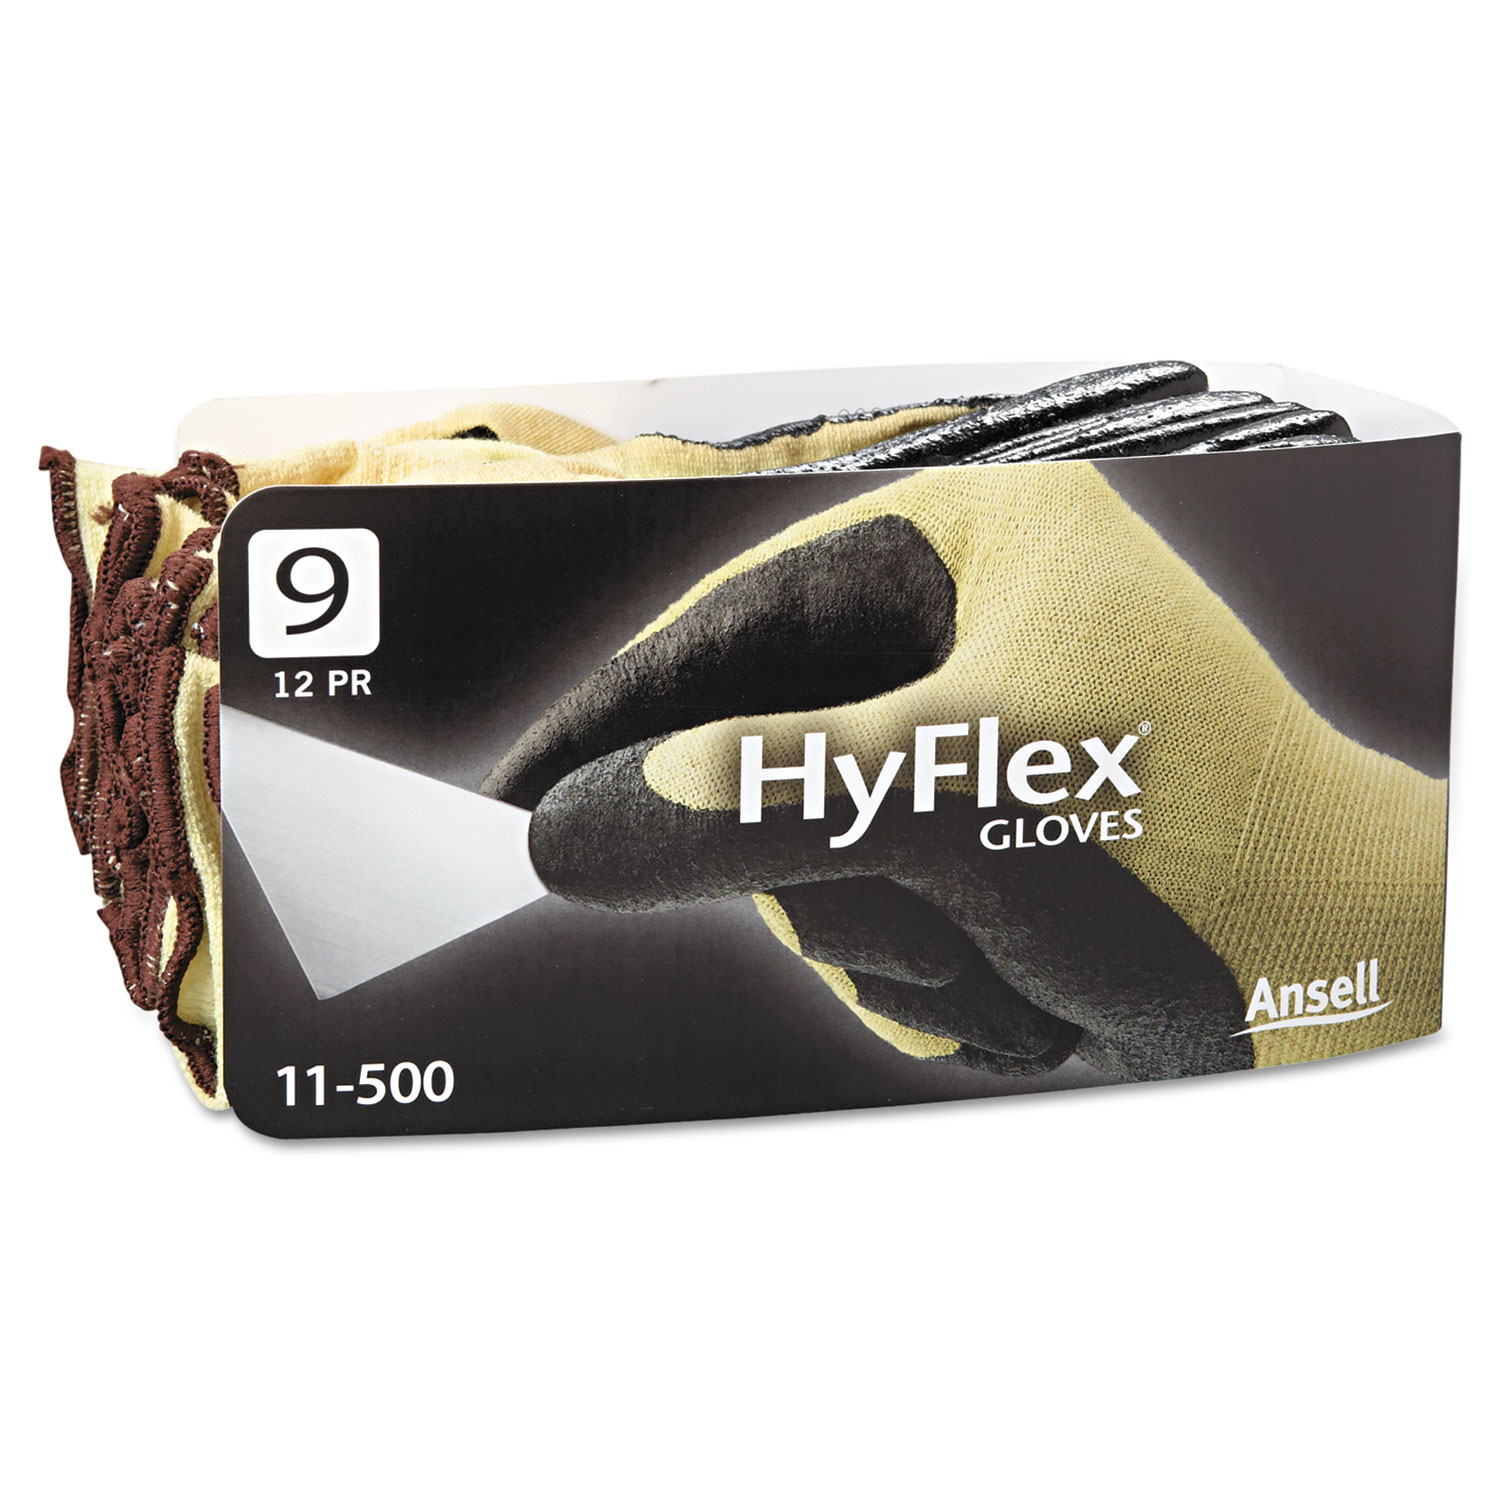  AnsellPro 103338 HyFlex Ultra Lightweight Assembly Gloves, Black/Yellow, Size 9, 12 Pairs (ANS115009) 